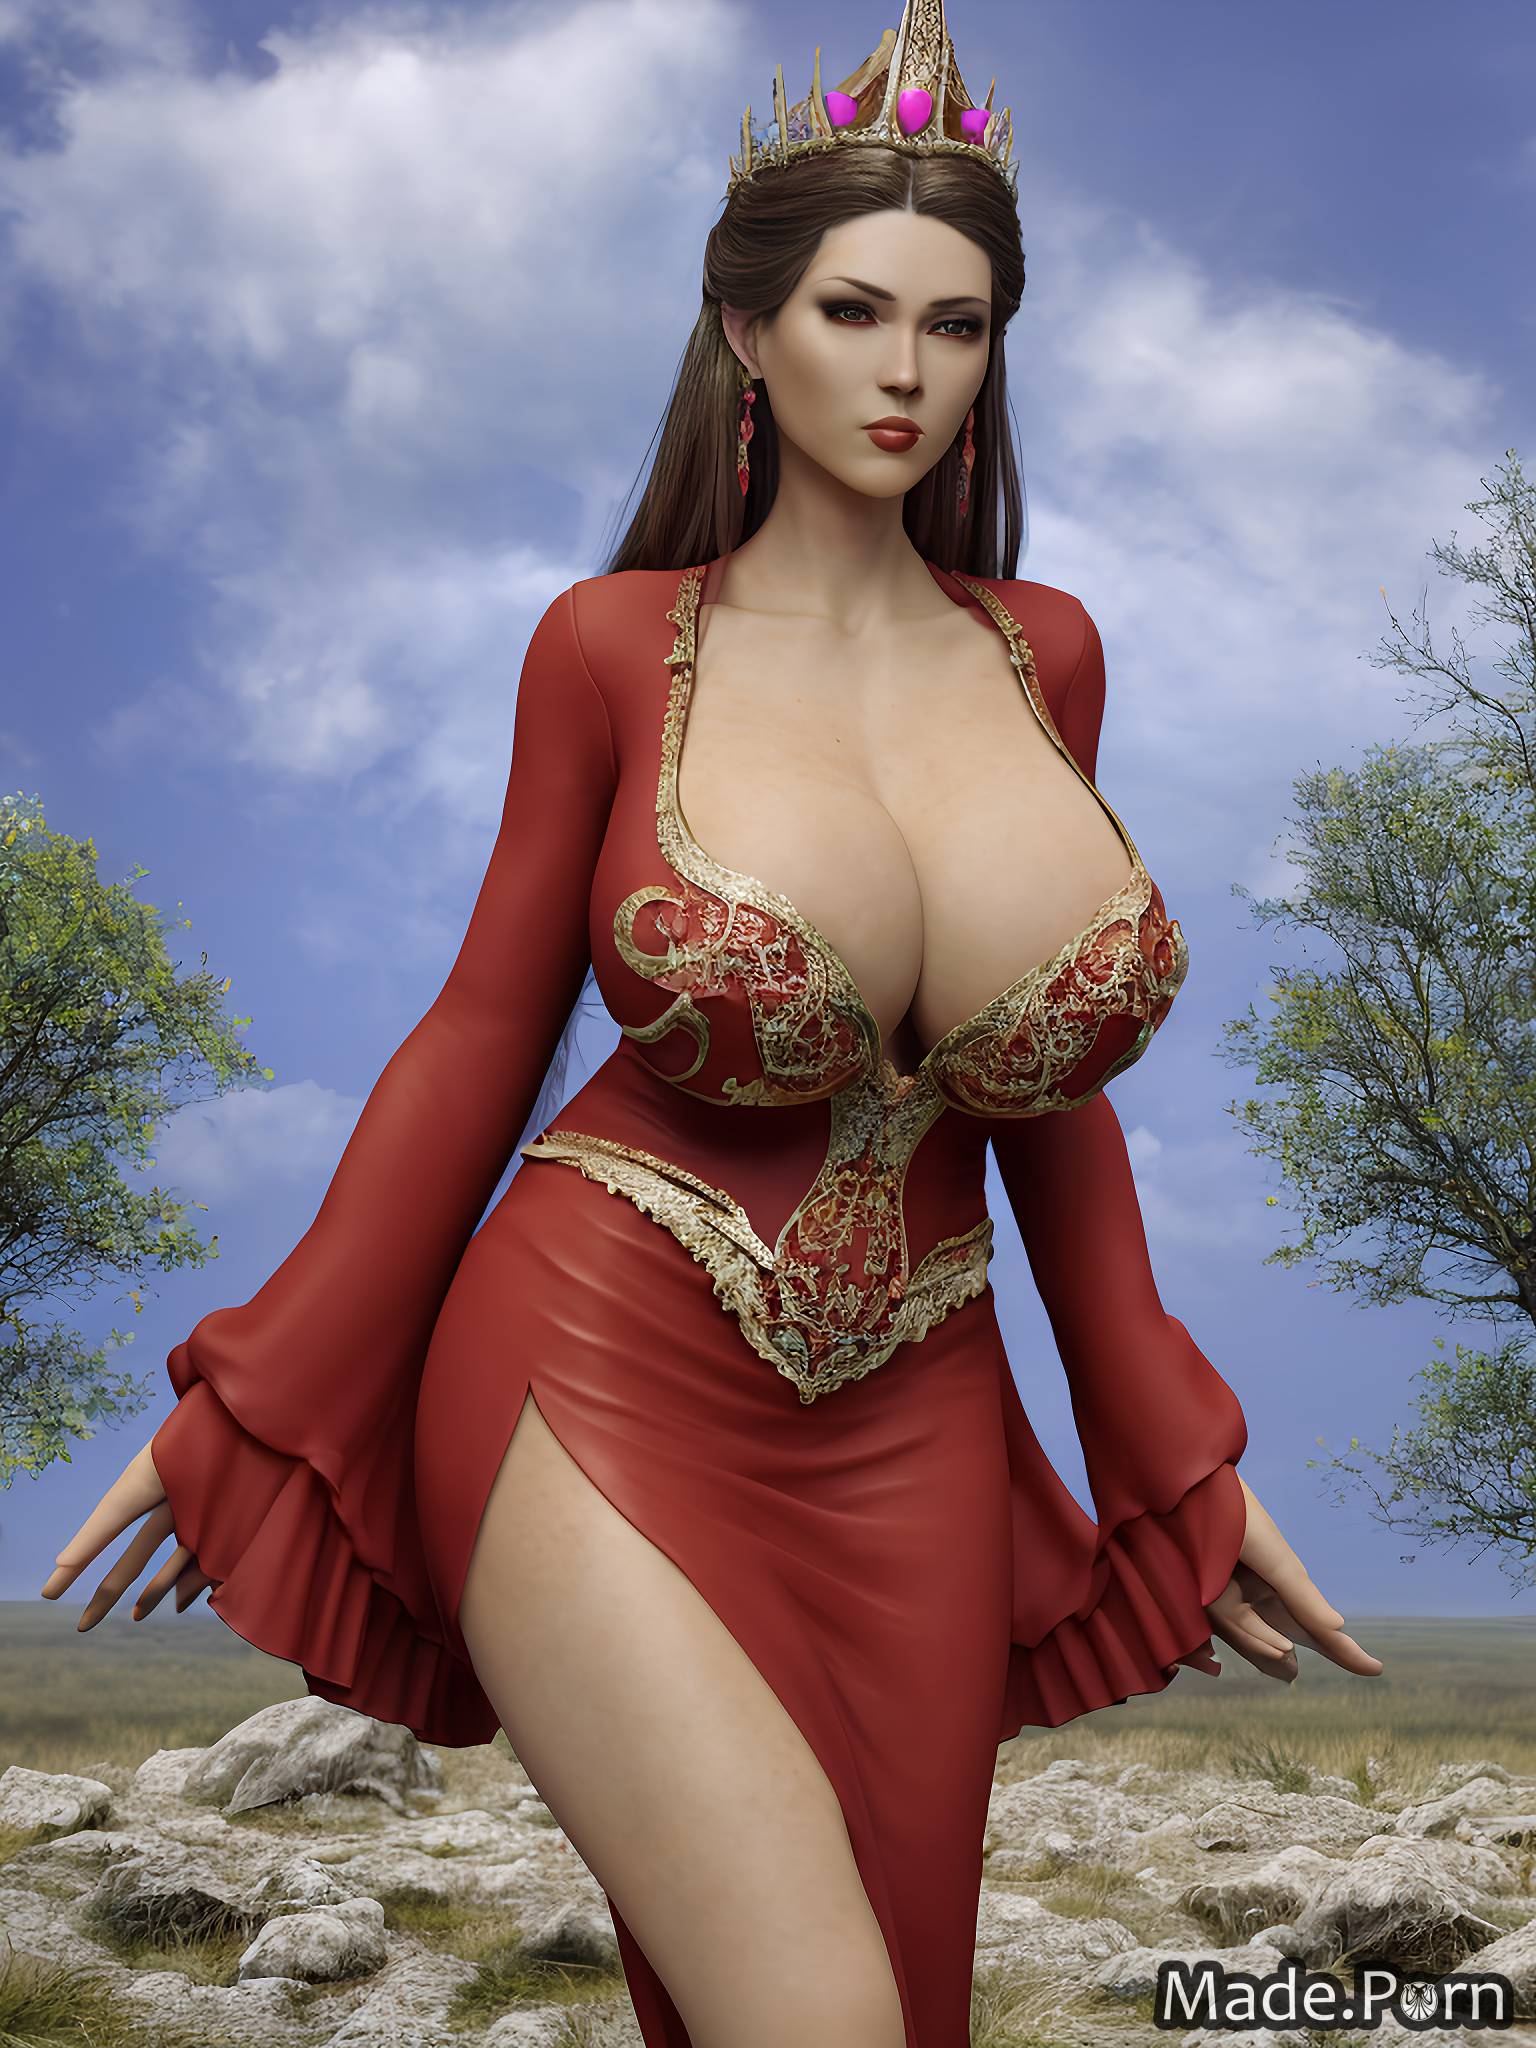 gigantic boobs thick thighs thick coronation robes perfect body princess portrait